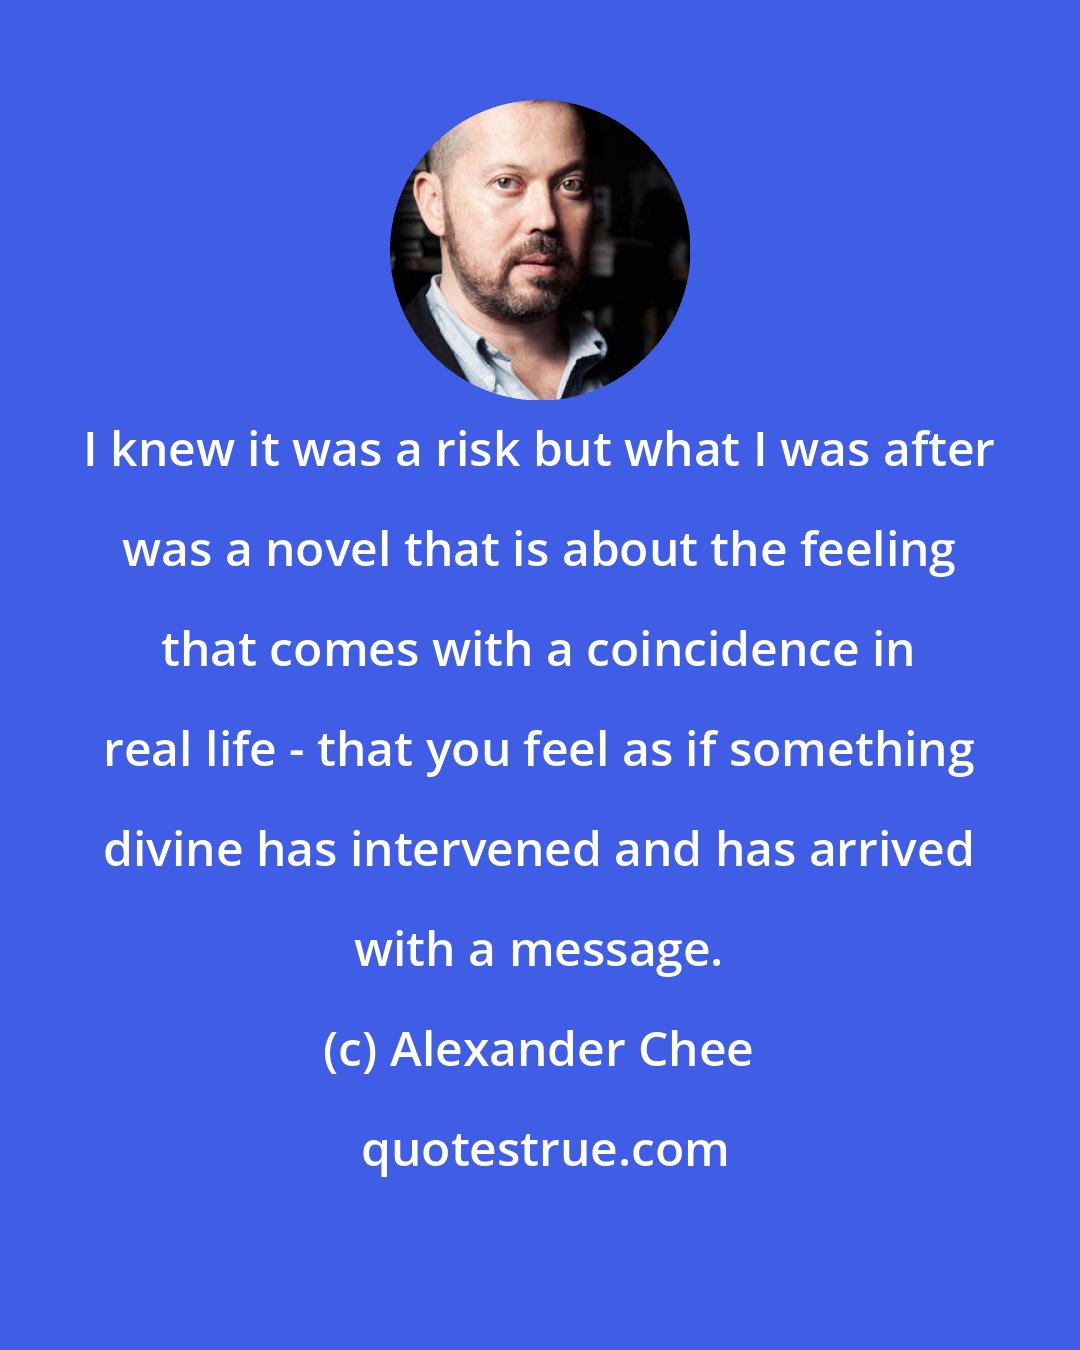 Alexander Chee: I knew it was a risk but what I was after was a novel that is about the feeling that comes with a coincidence in real life - that you feel as if something divine has intervened and has arrived with a message.